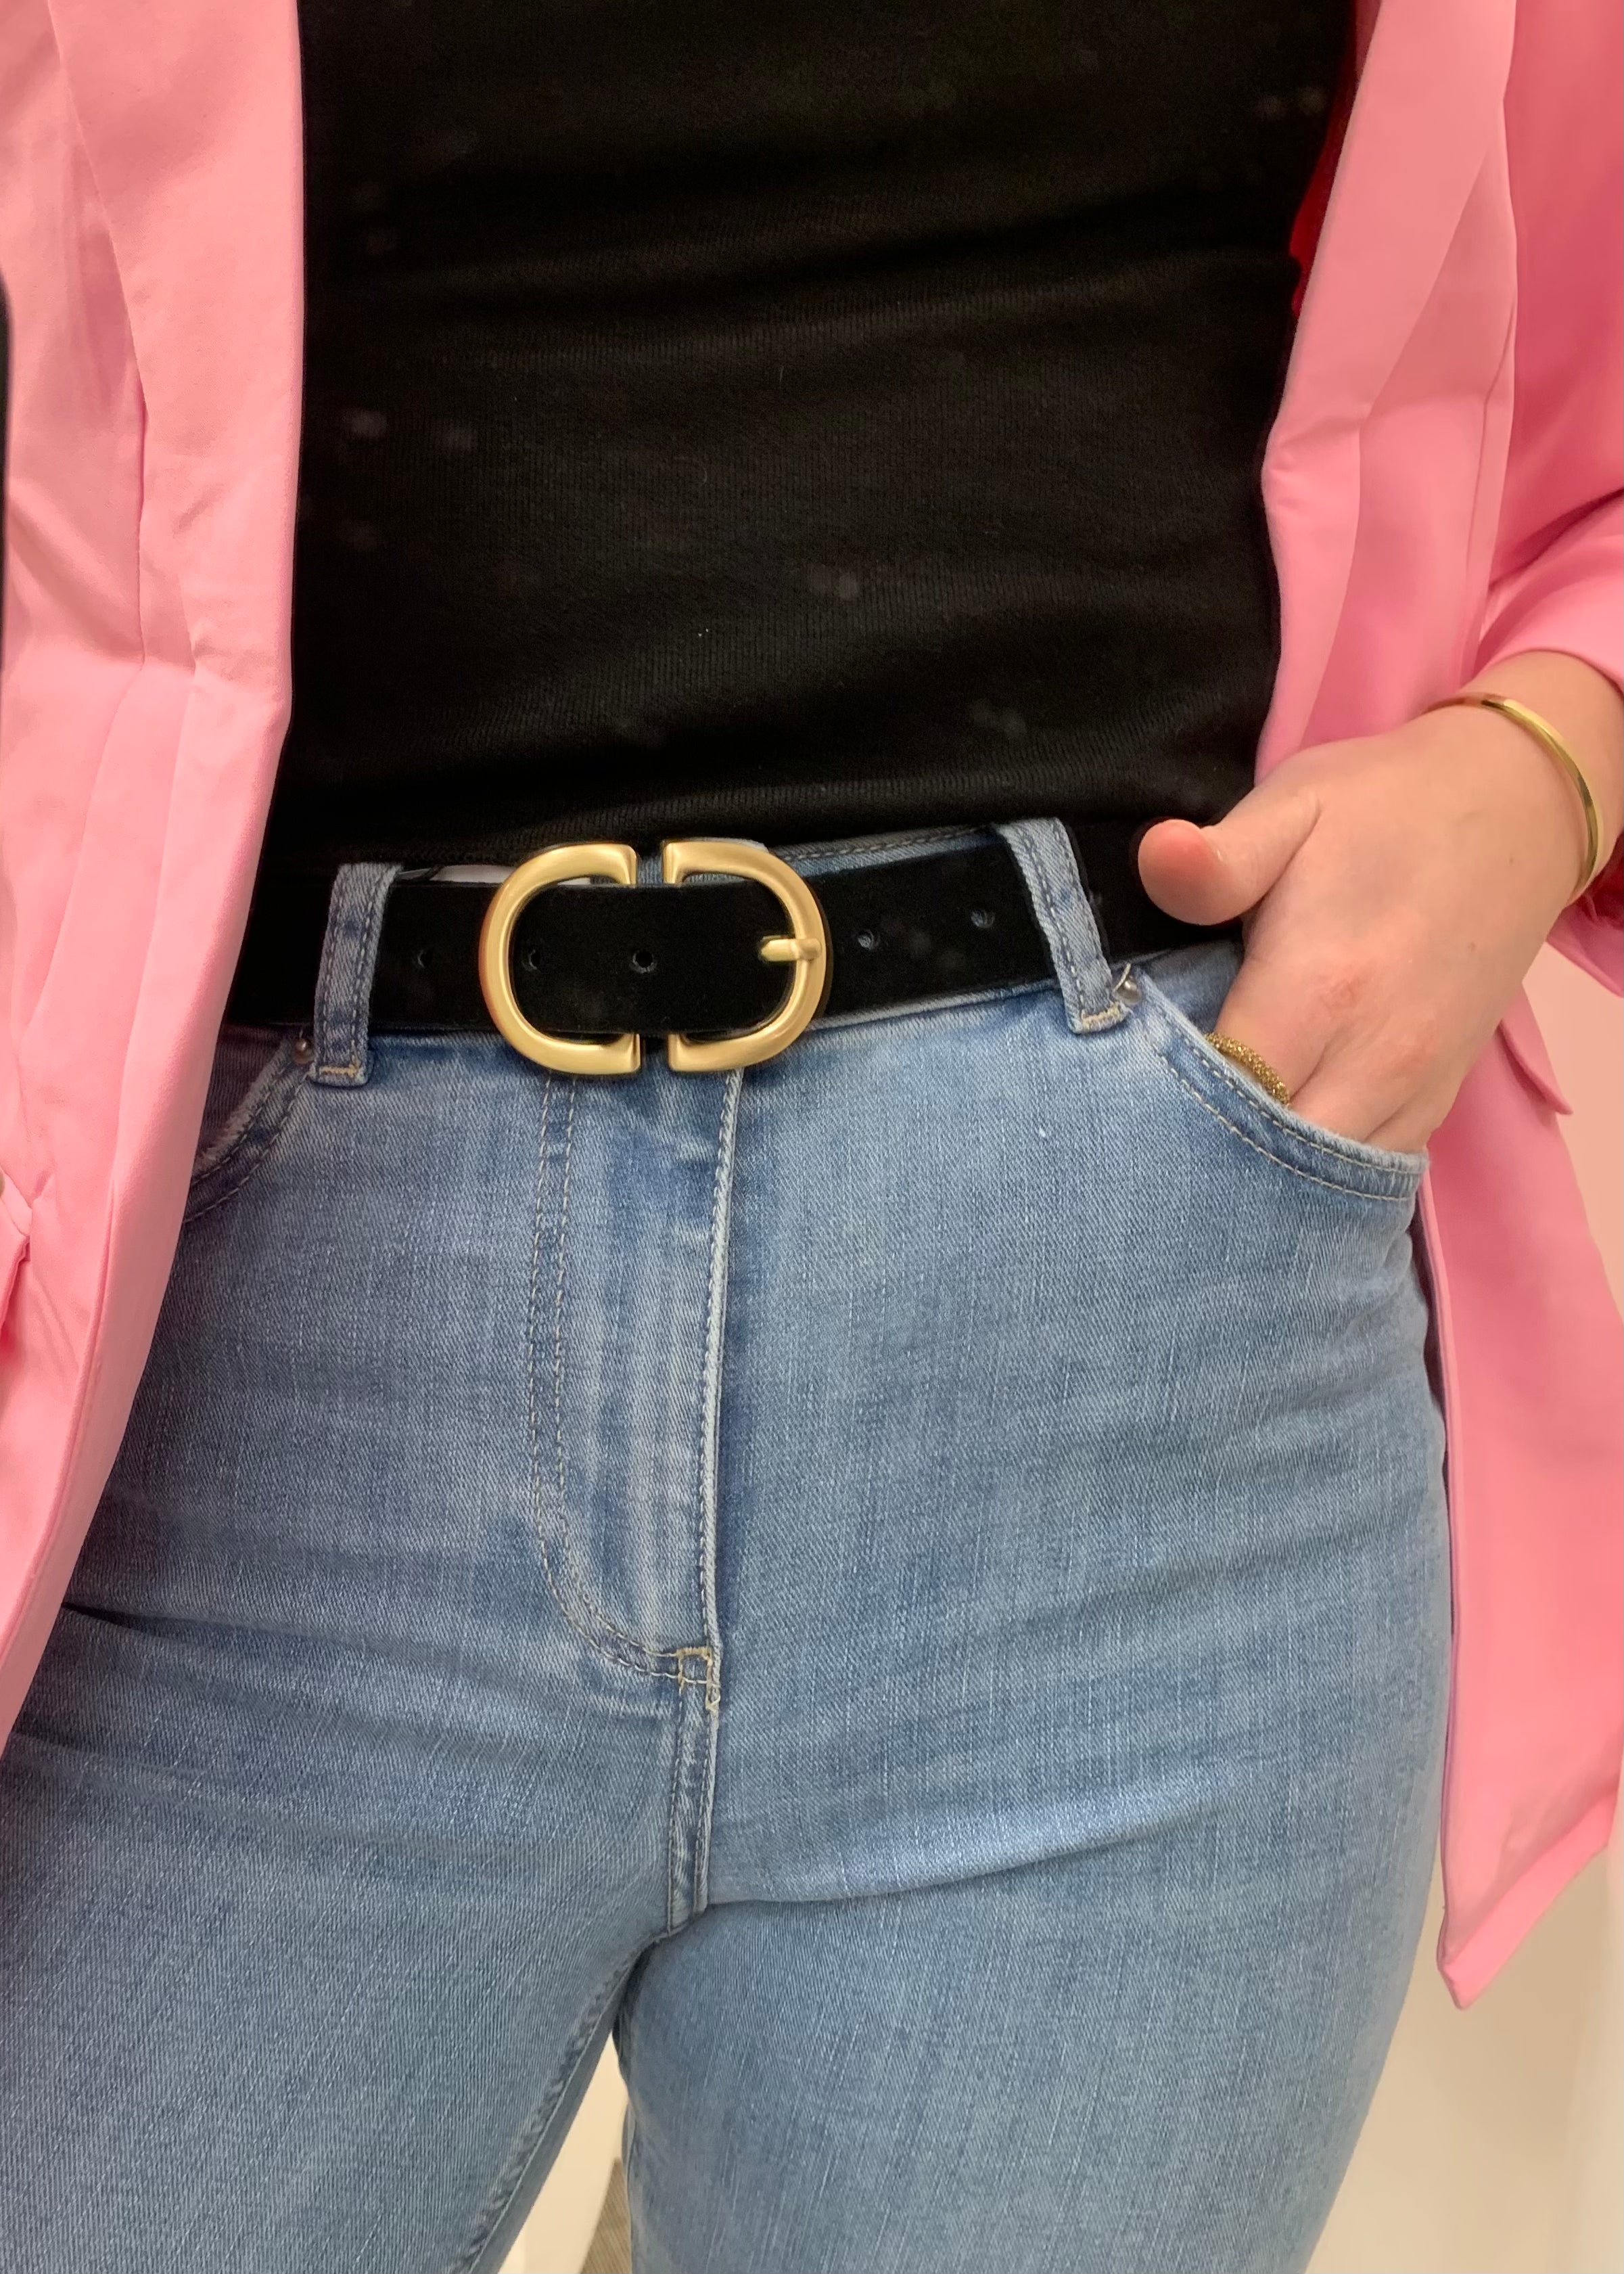 PIECES - JUVA SUEDE JEANS BELT - GOLD BRUSHED